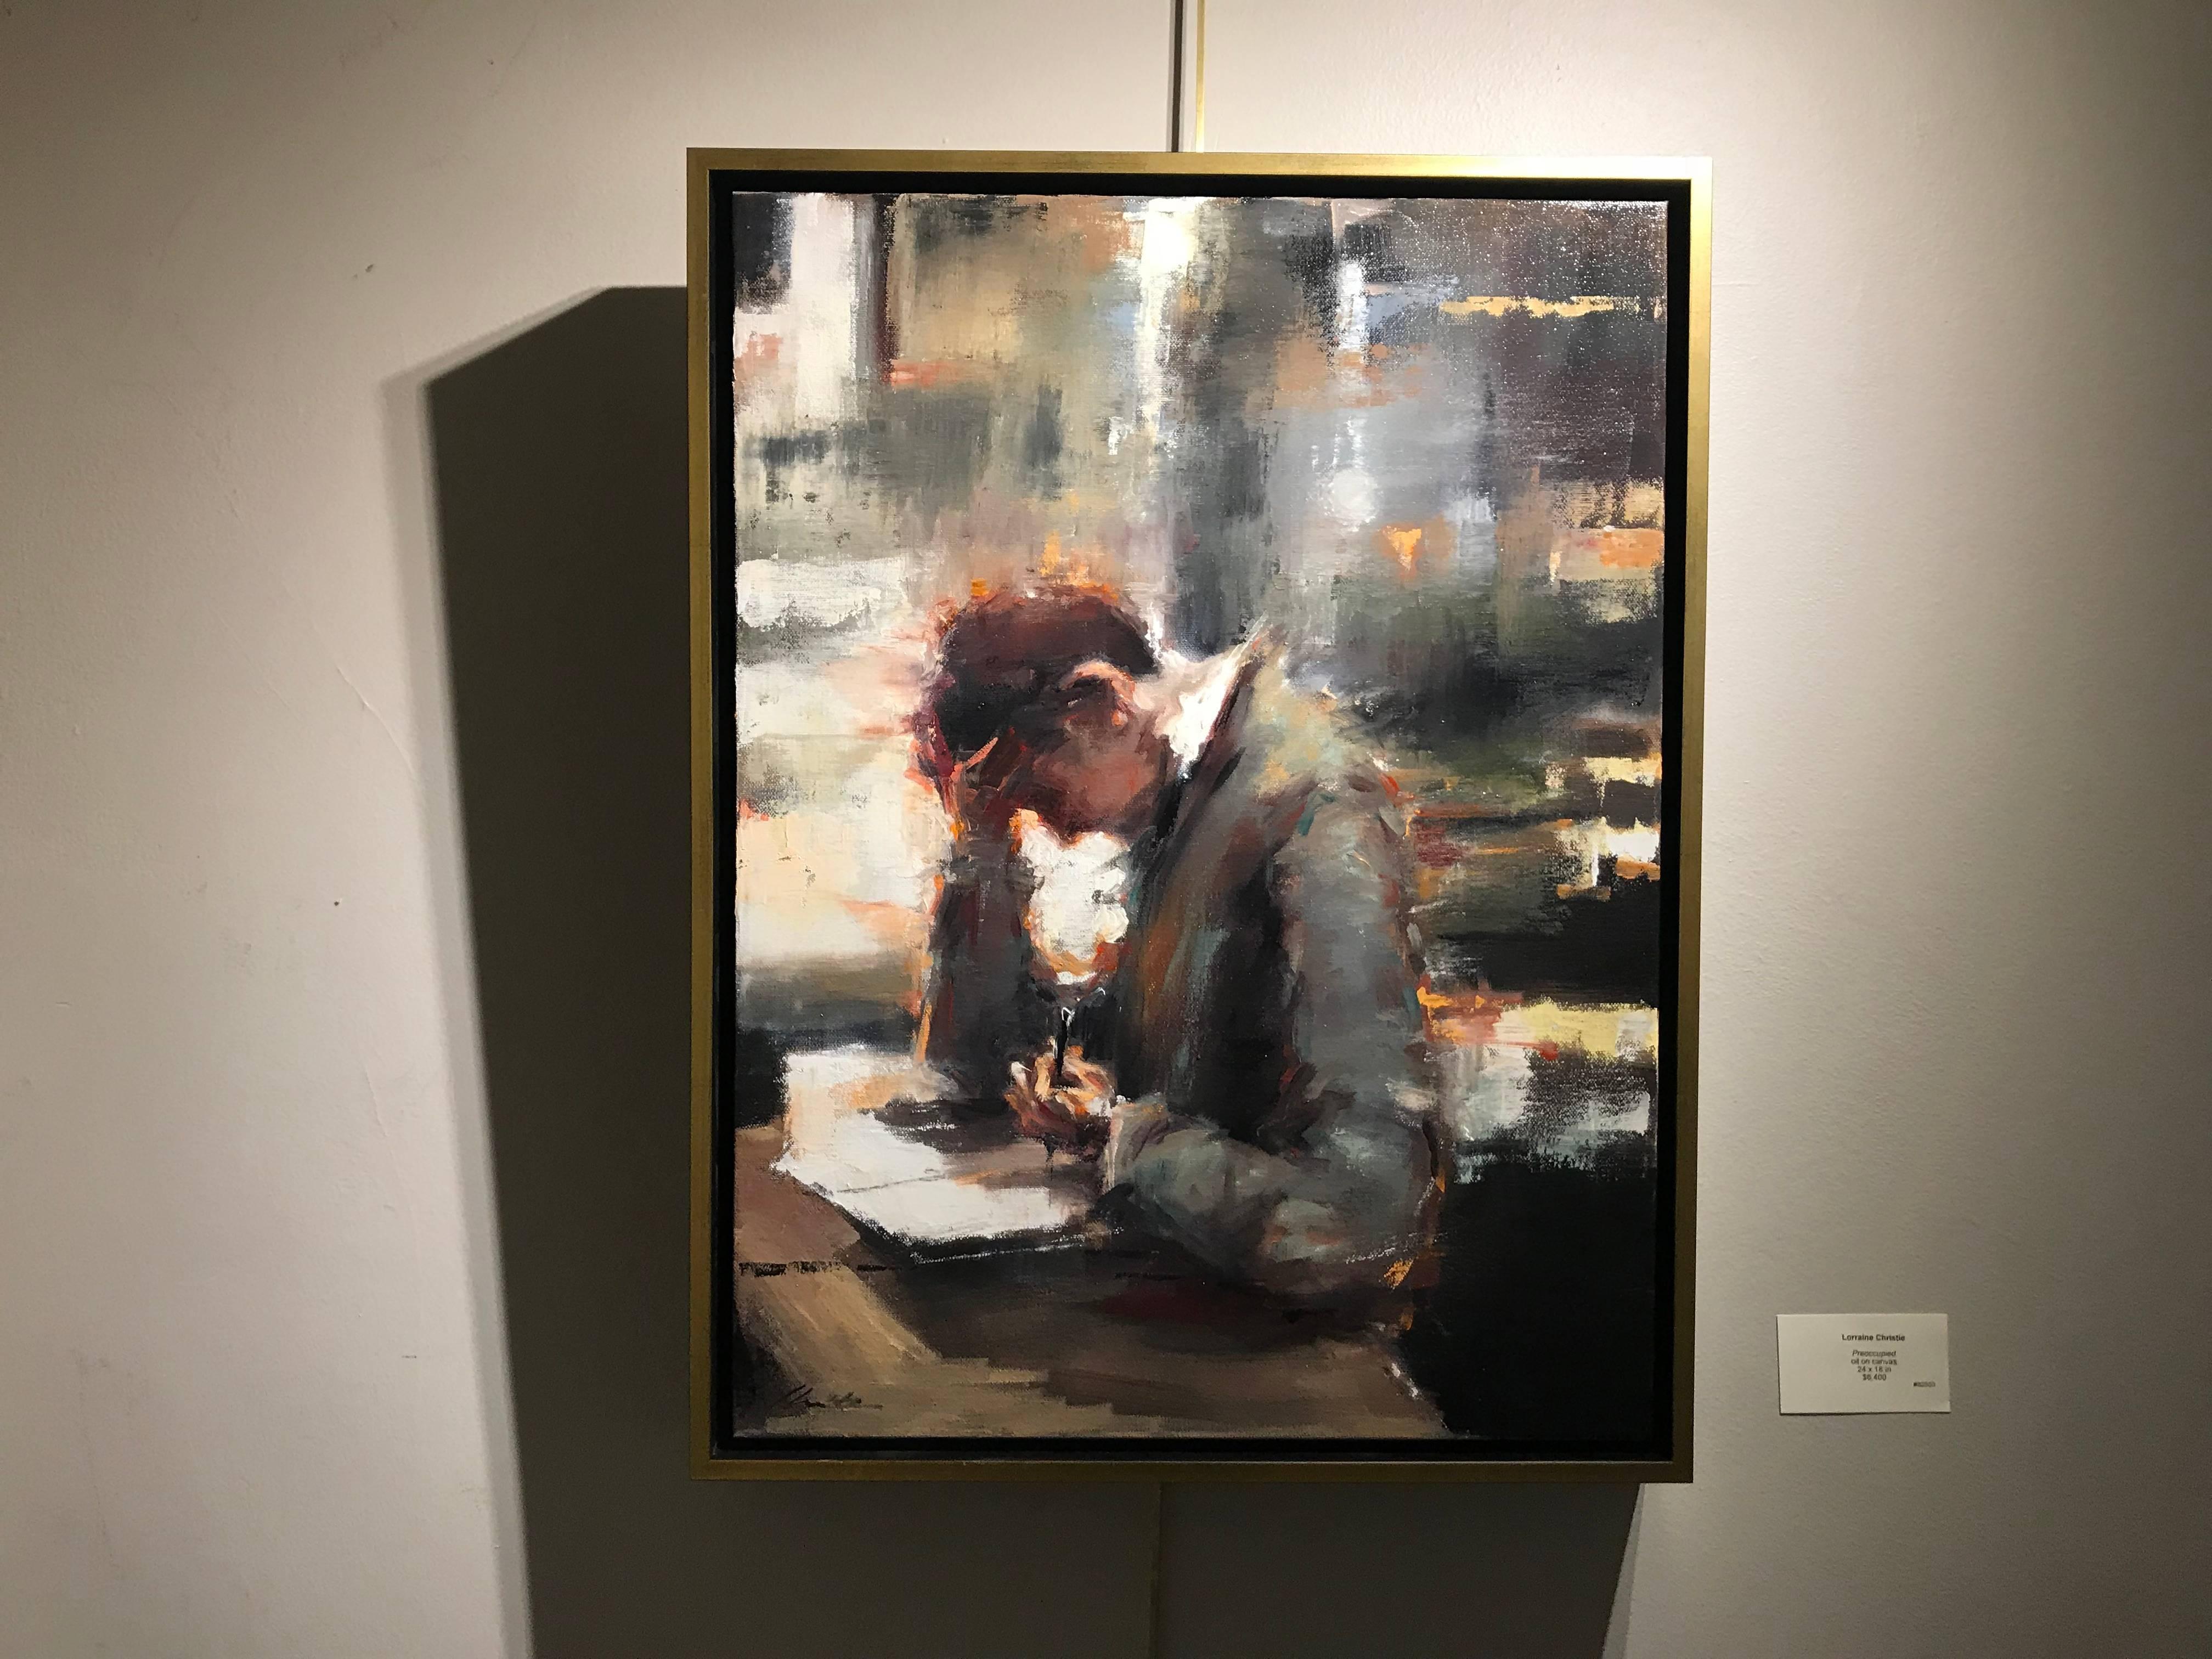 The unframed size of the canvas is 24 x 18.

Enigmatic and alluring. Evocative and romantic.  Emotional and powerful.  All words to describe Lorraine Christie’s masterful paintings that revolve around love, loss, lust and life’s daily communications